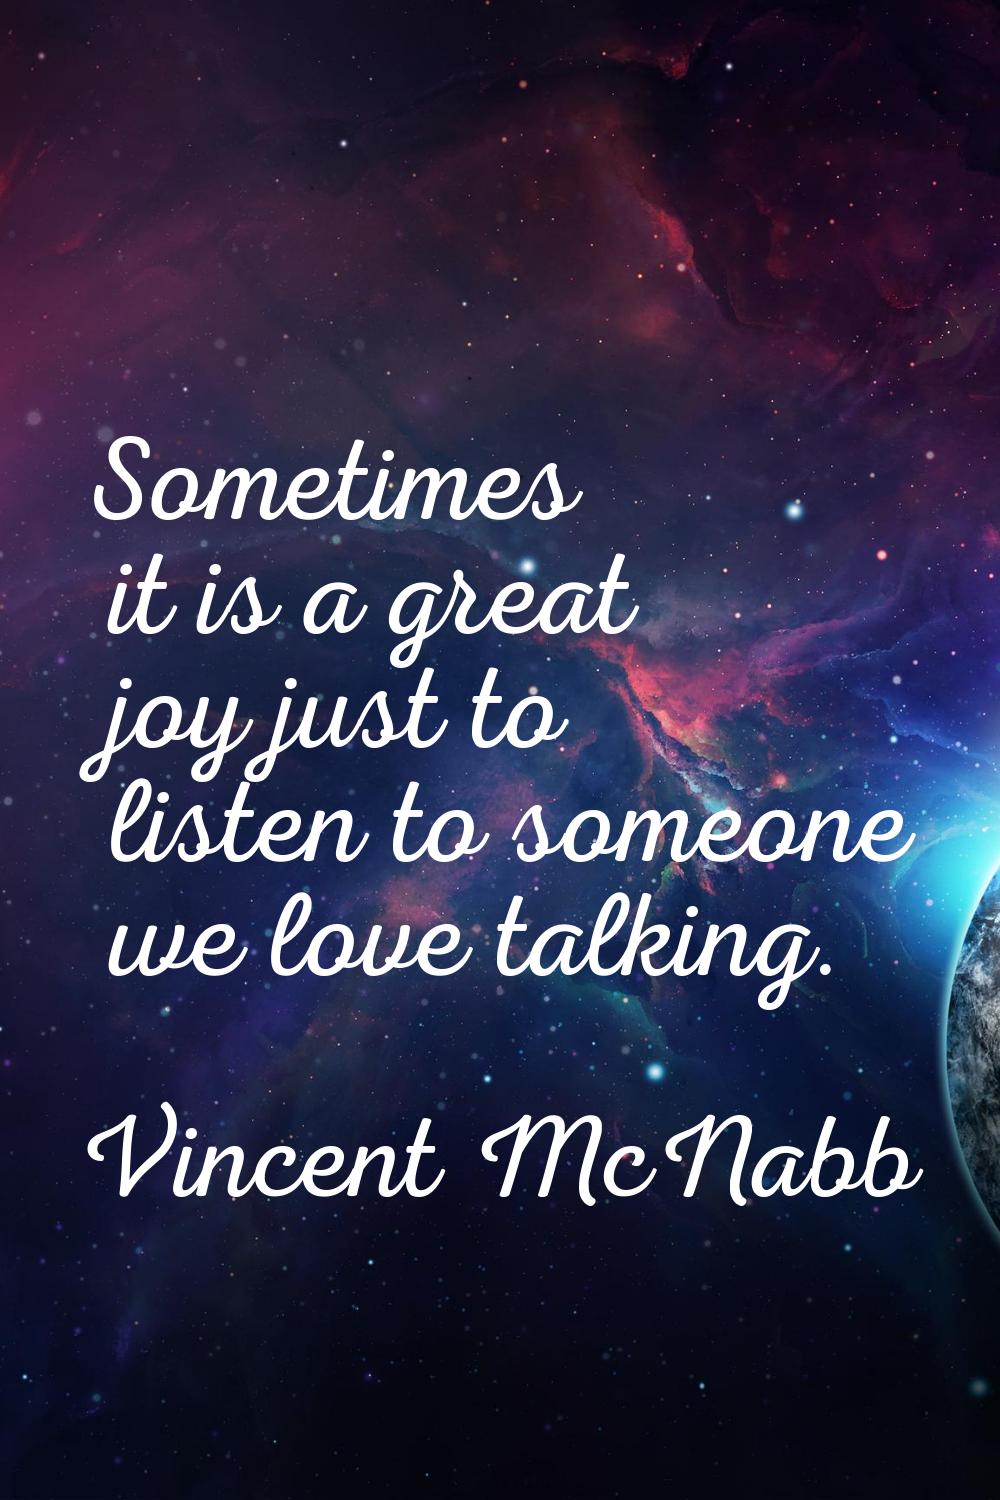 Sometimes it is a great joy just to listen to someone we love talking.